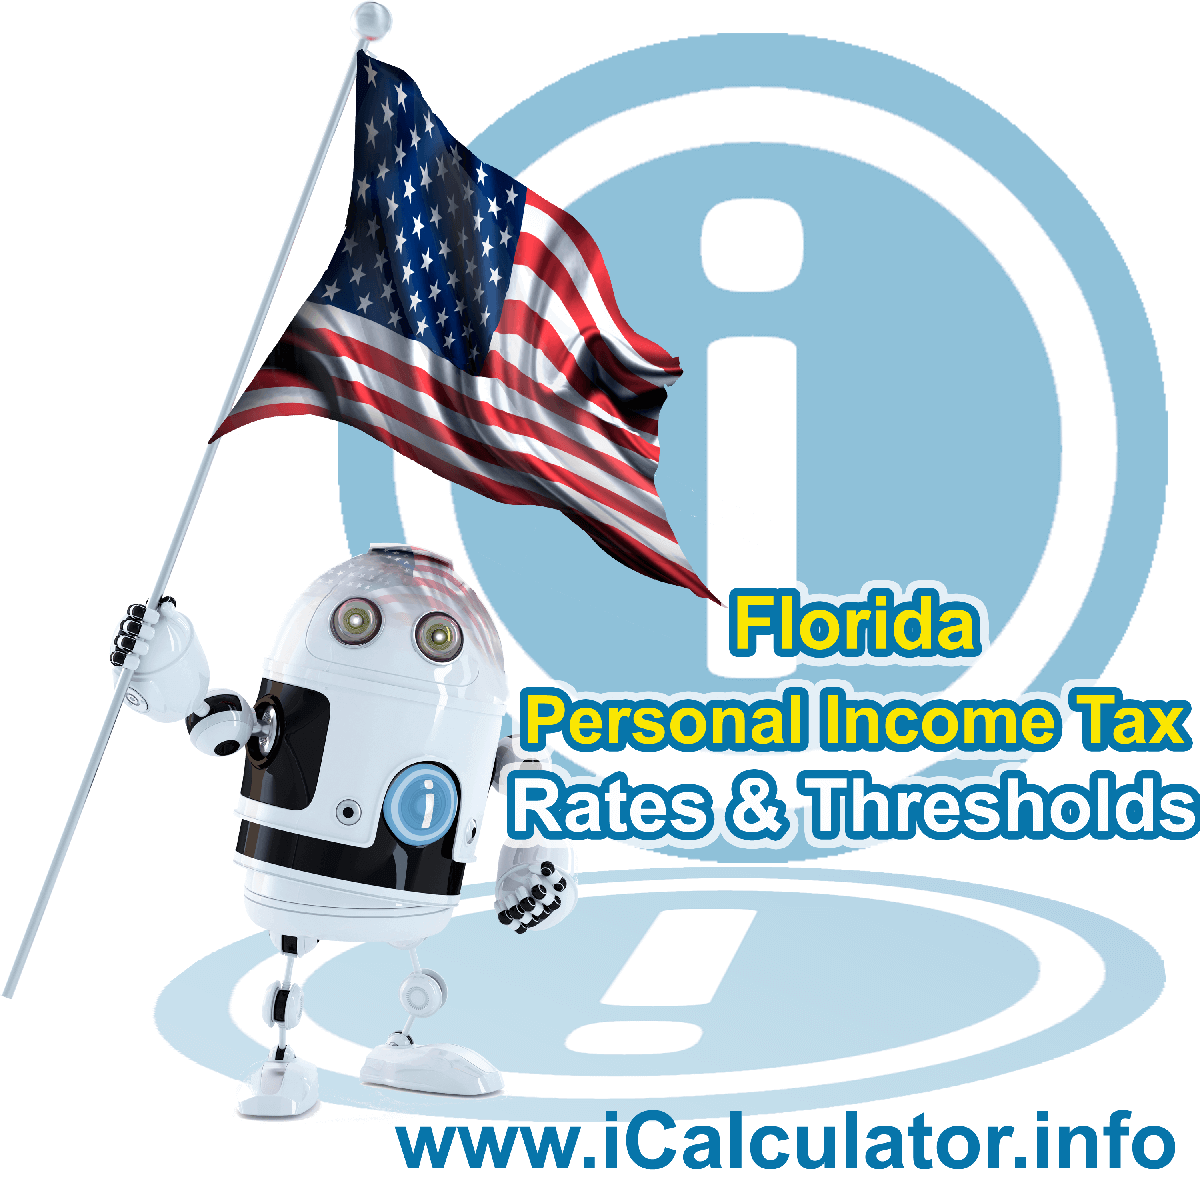 Florida State Tax Tables 2022. This image displays details of the Florida State Tax Tables for the 2022 tax return year which is provided in support of the 2022 US Tax Calculator